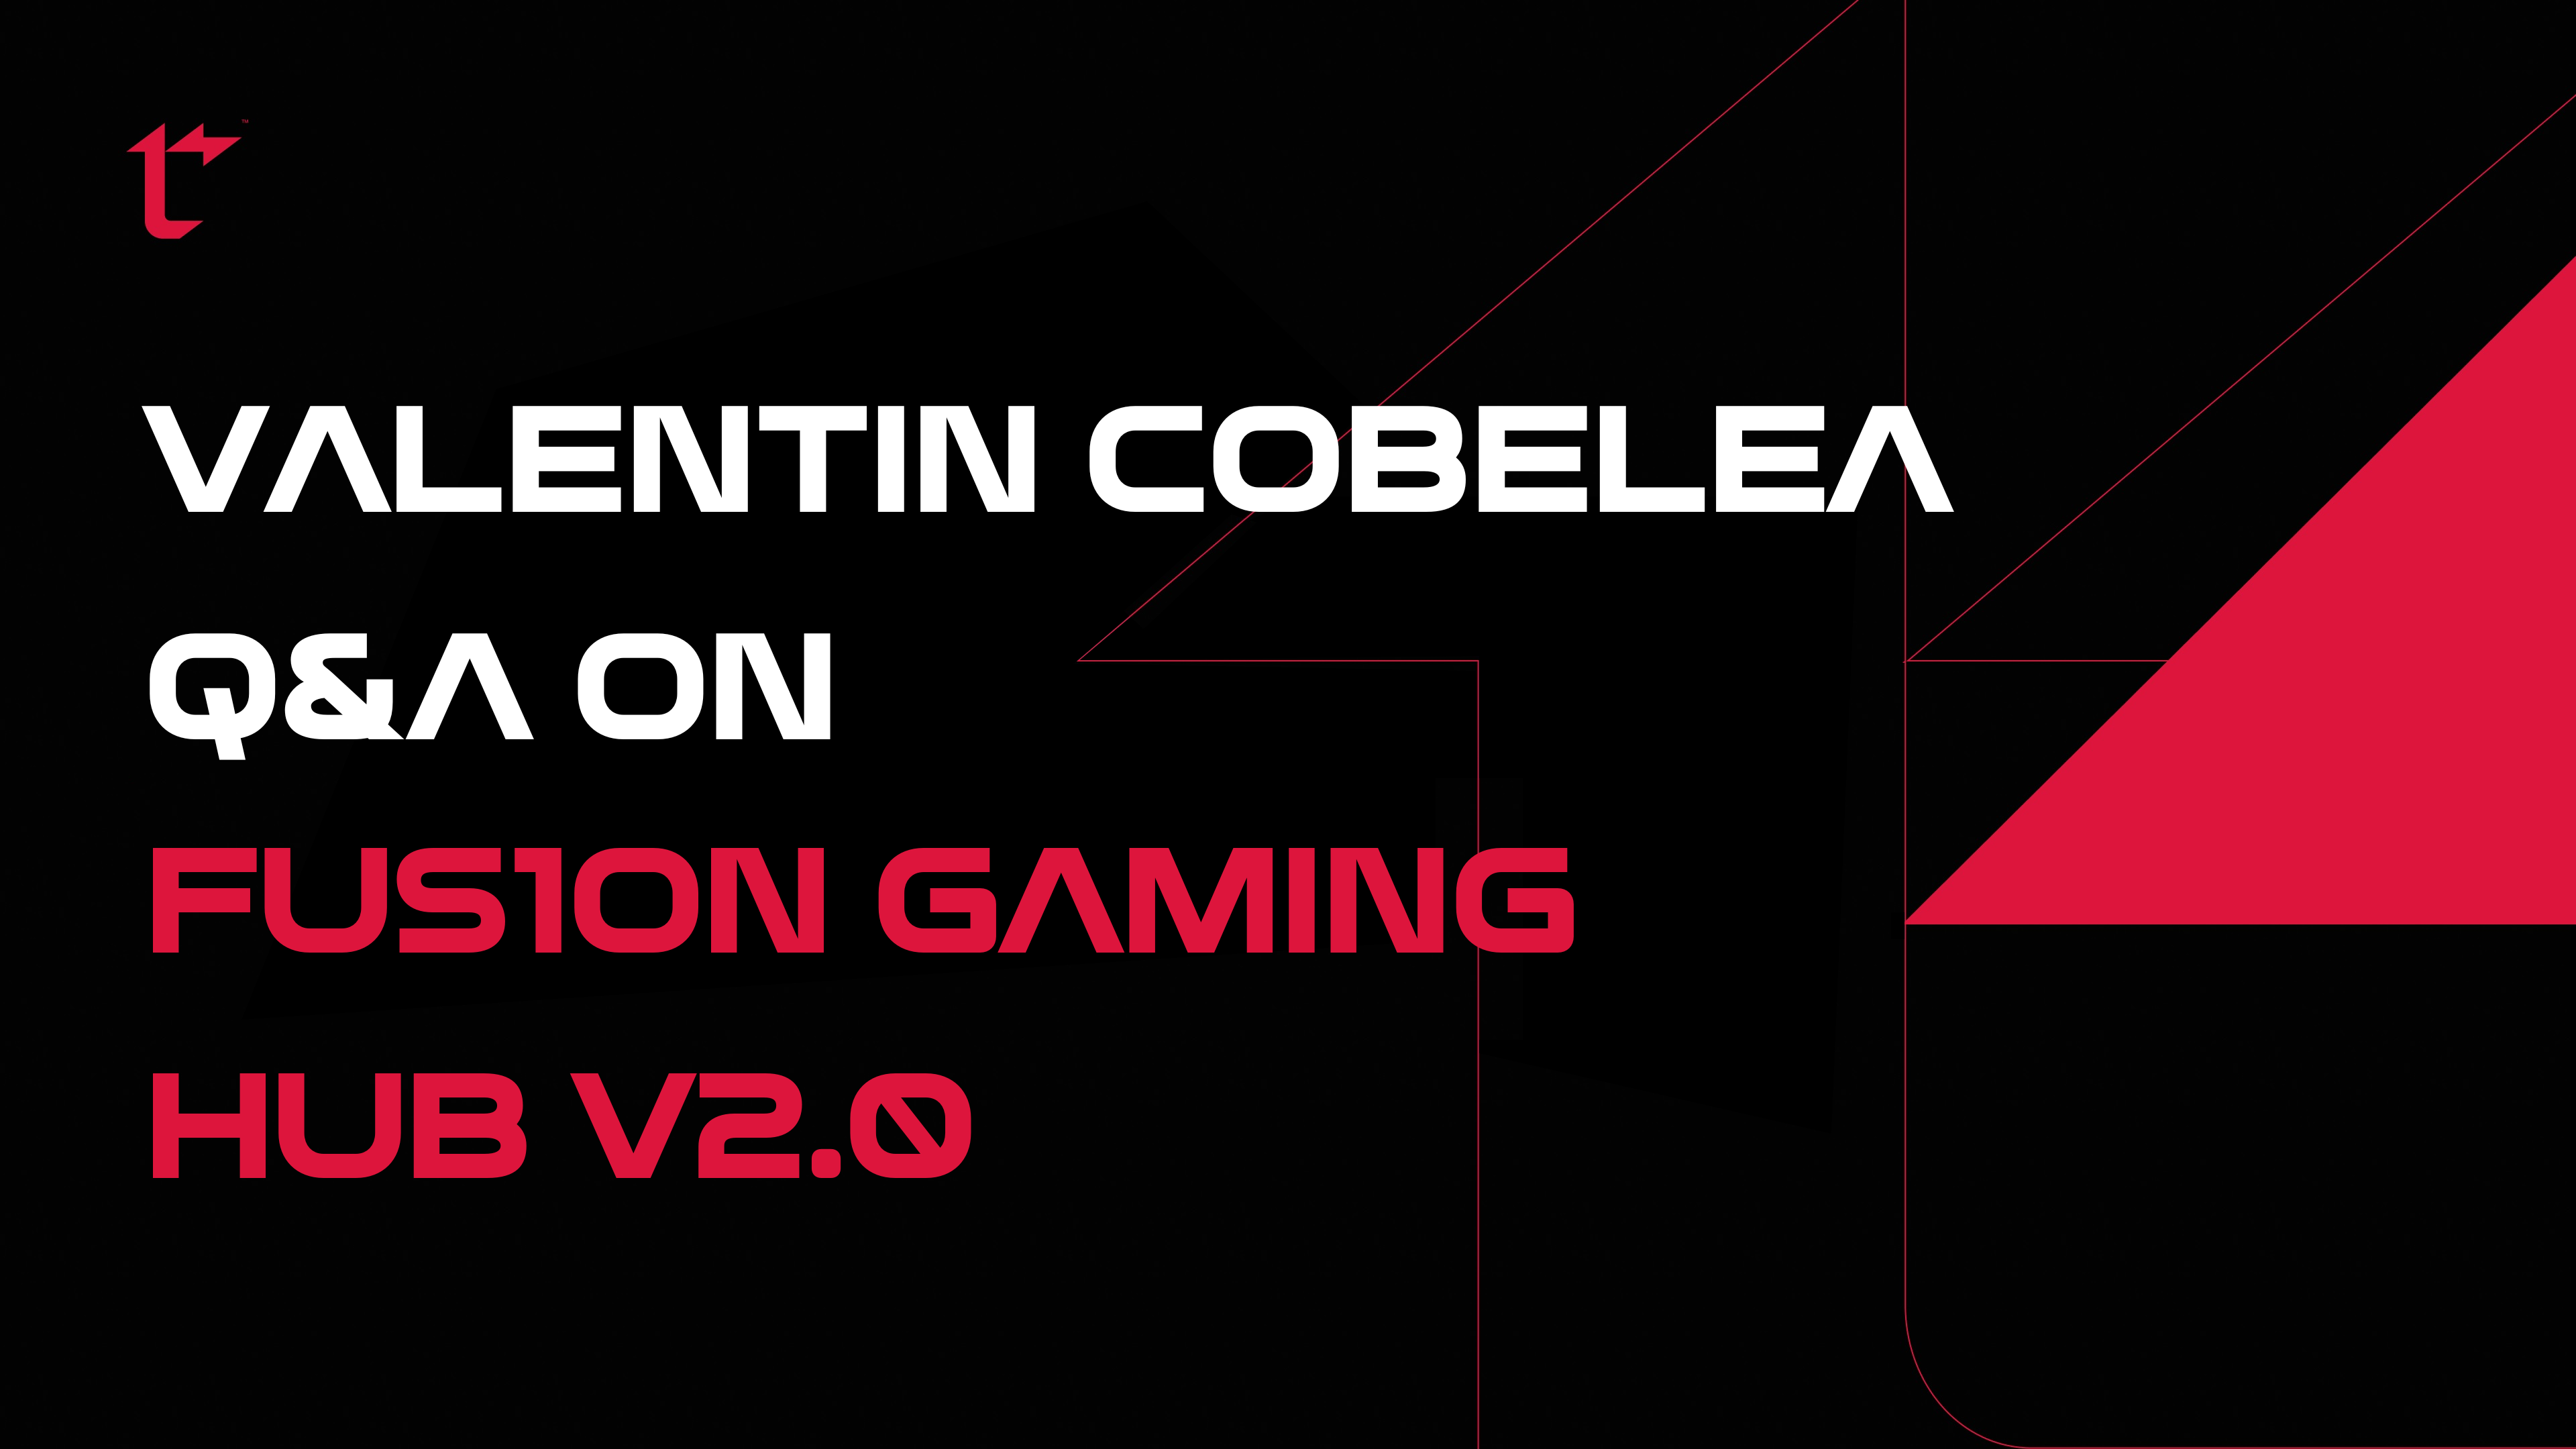 Fus1on Gaming Hub 2.0: Q&A with Valentin Cobelea